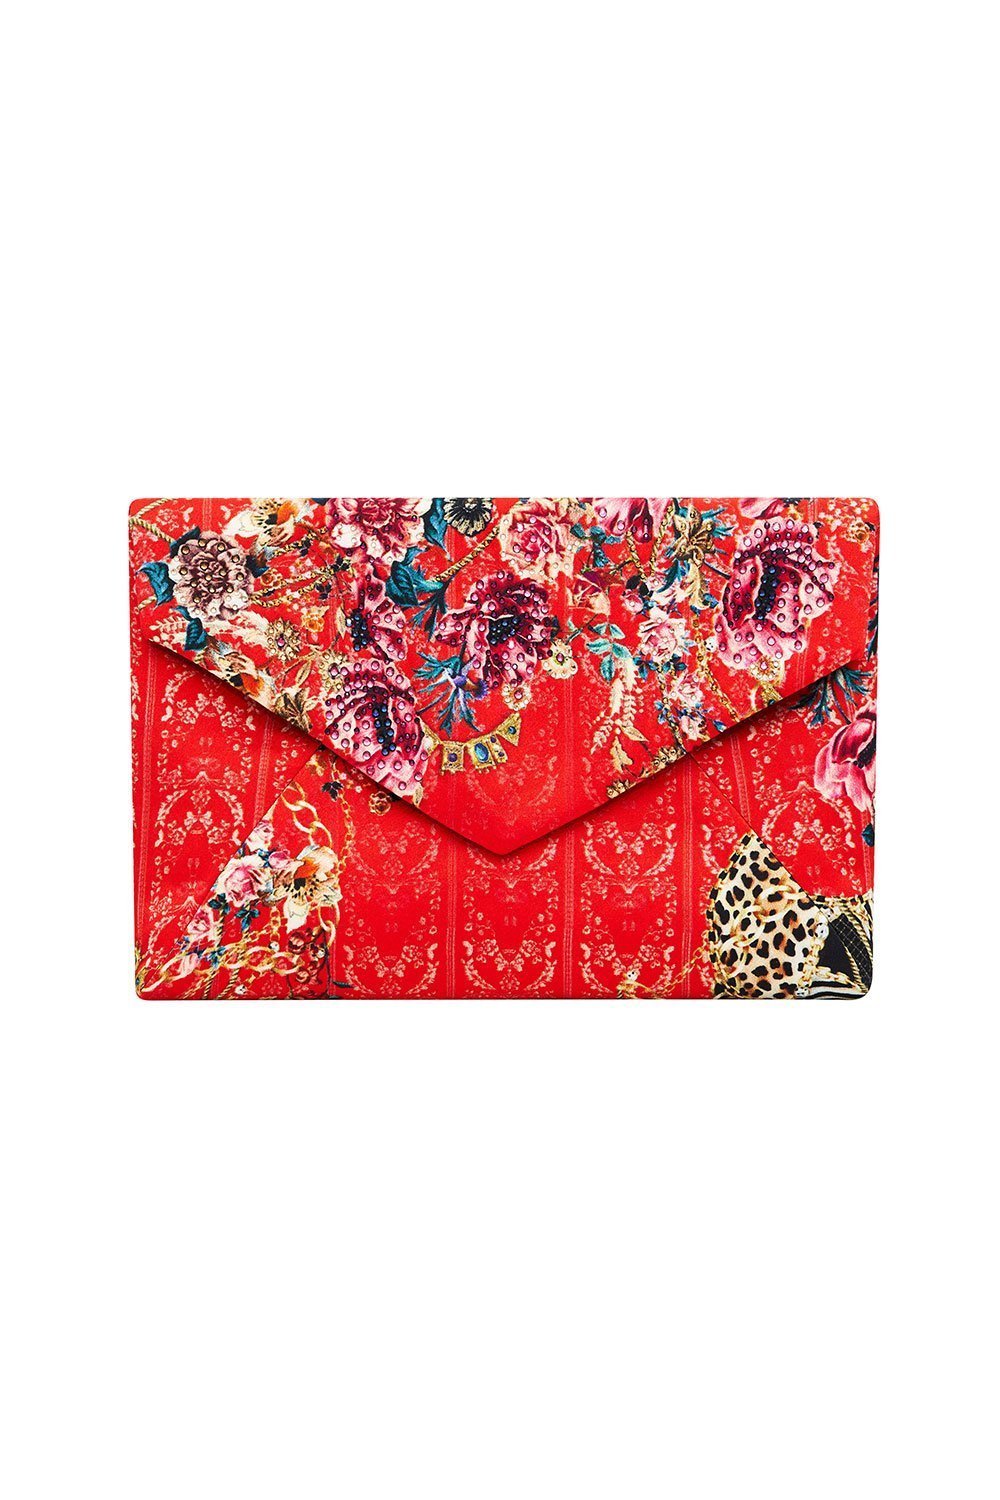 ENVELOPE CLUTCH AND THE QUEEN WORE RED